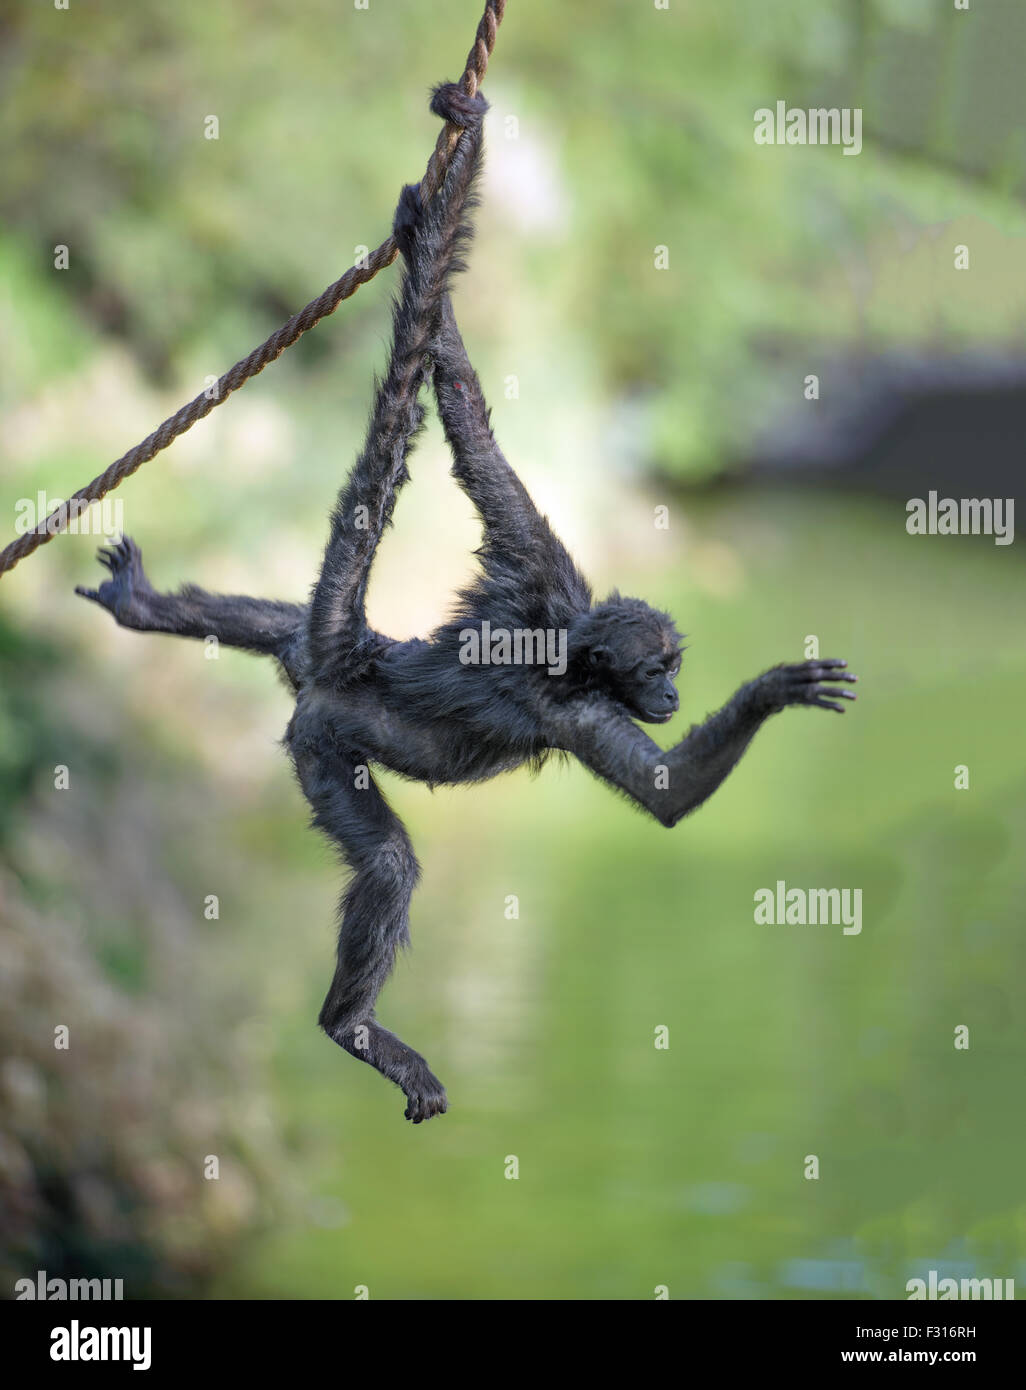 Black-handed spider monkey hanging on a rope Stock Photo